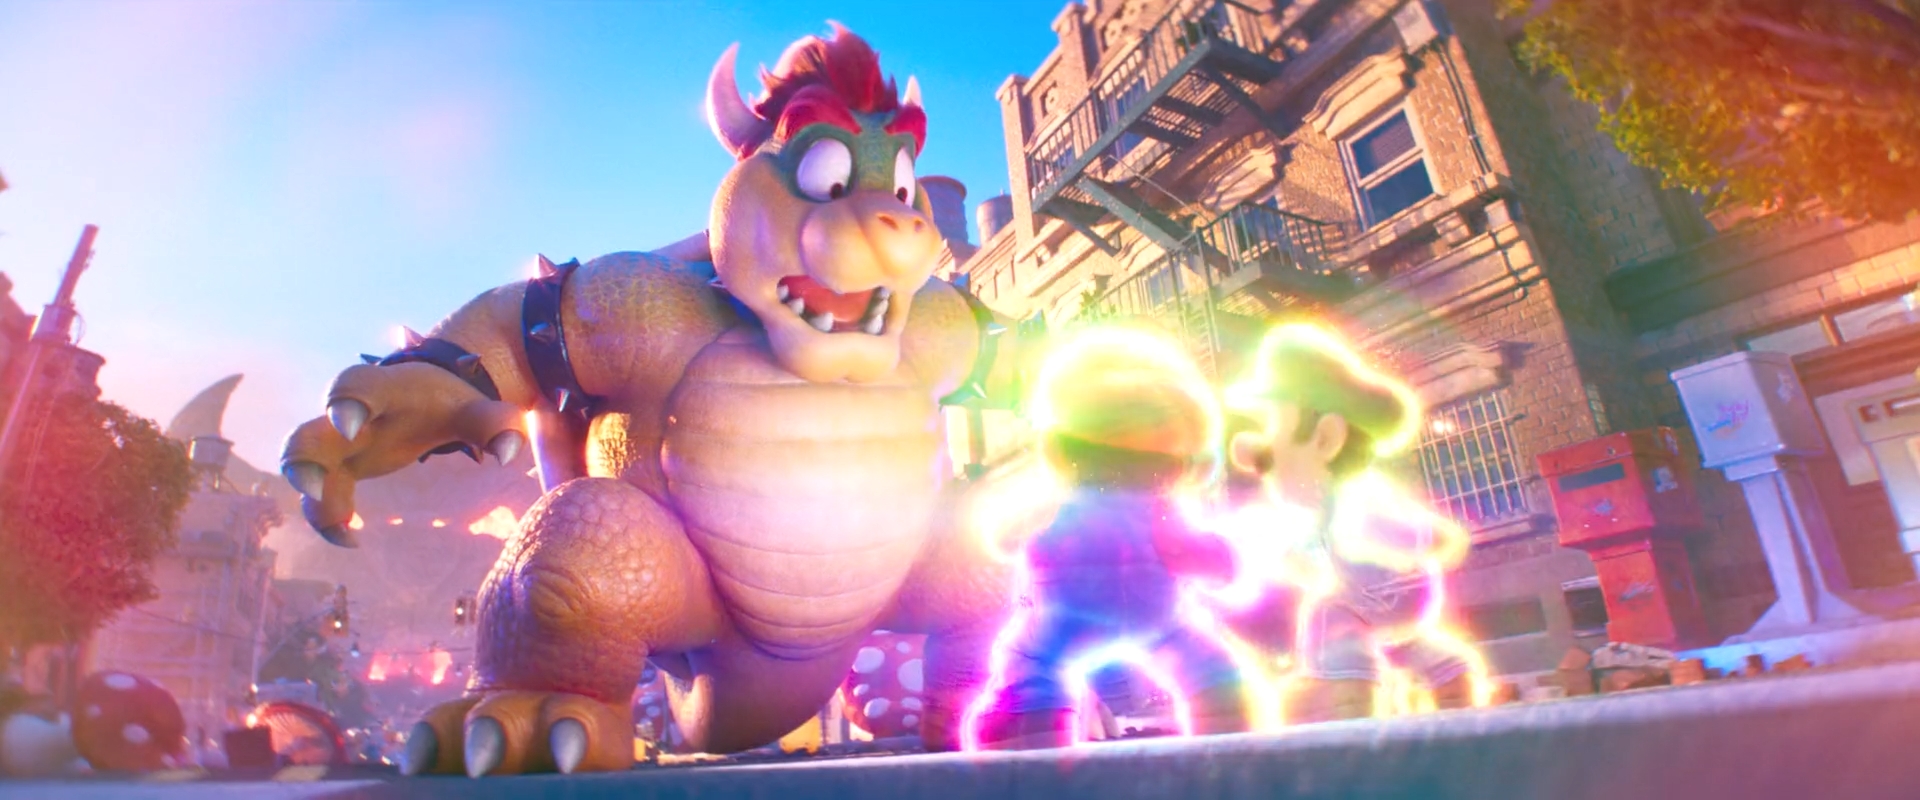 The Super Mario Bros Movie - Bowser PNG 2 by lolthd on DeviantArt